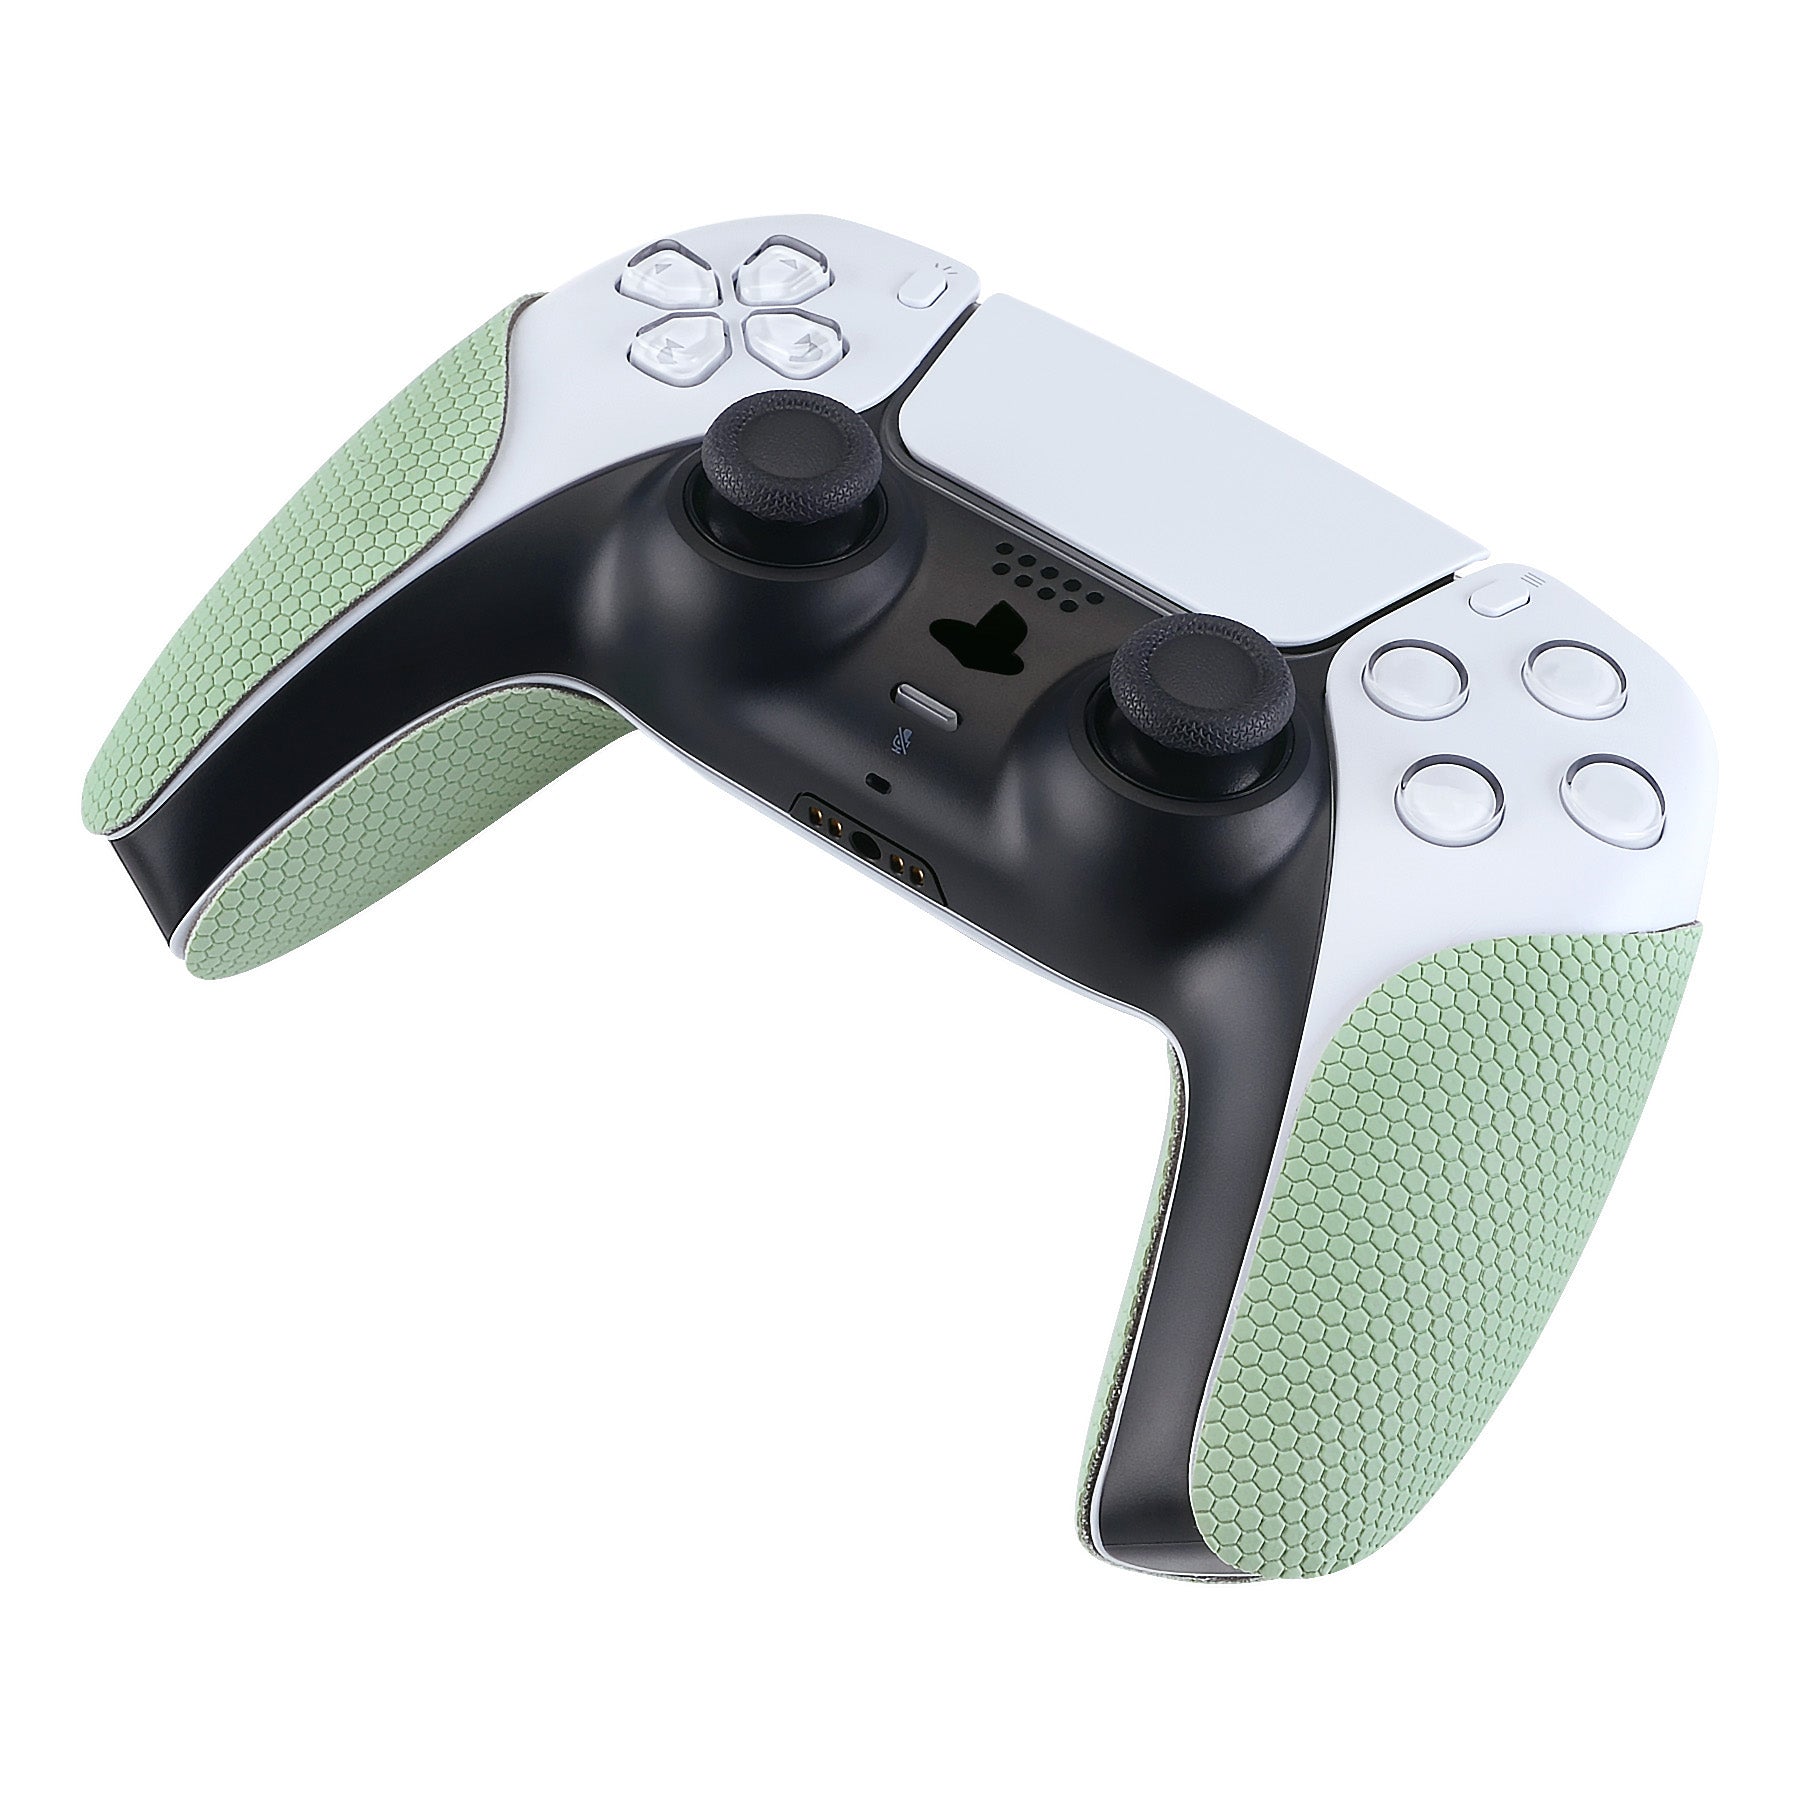 PlayVital Matcha Green Anti-Skid Sweat-Absorbent Controller Grip for PlayStation 5 Controller, Professional Textured Soft Rubber Pads Handle Grips for PS5 Controller - PFPJ025 PlayVital